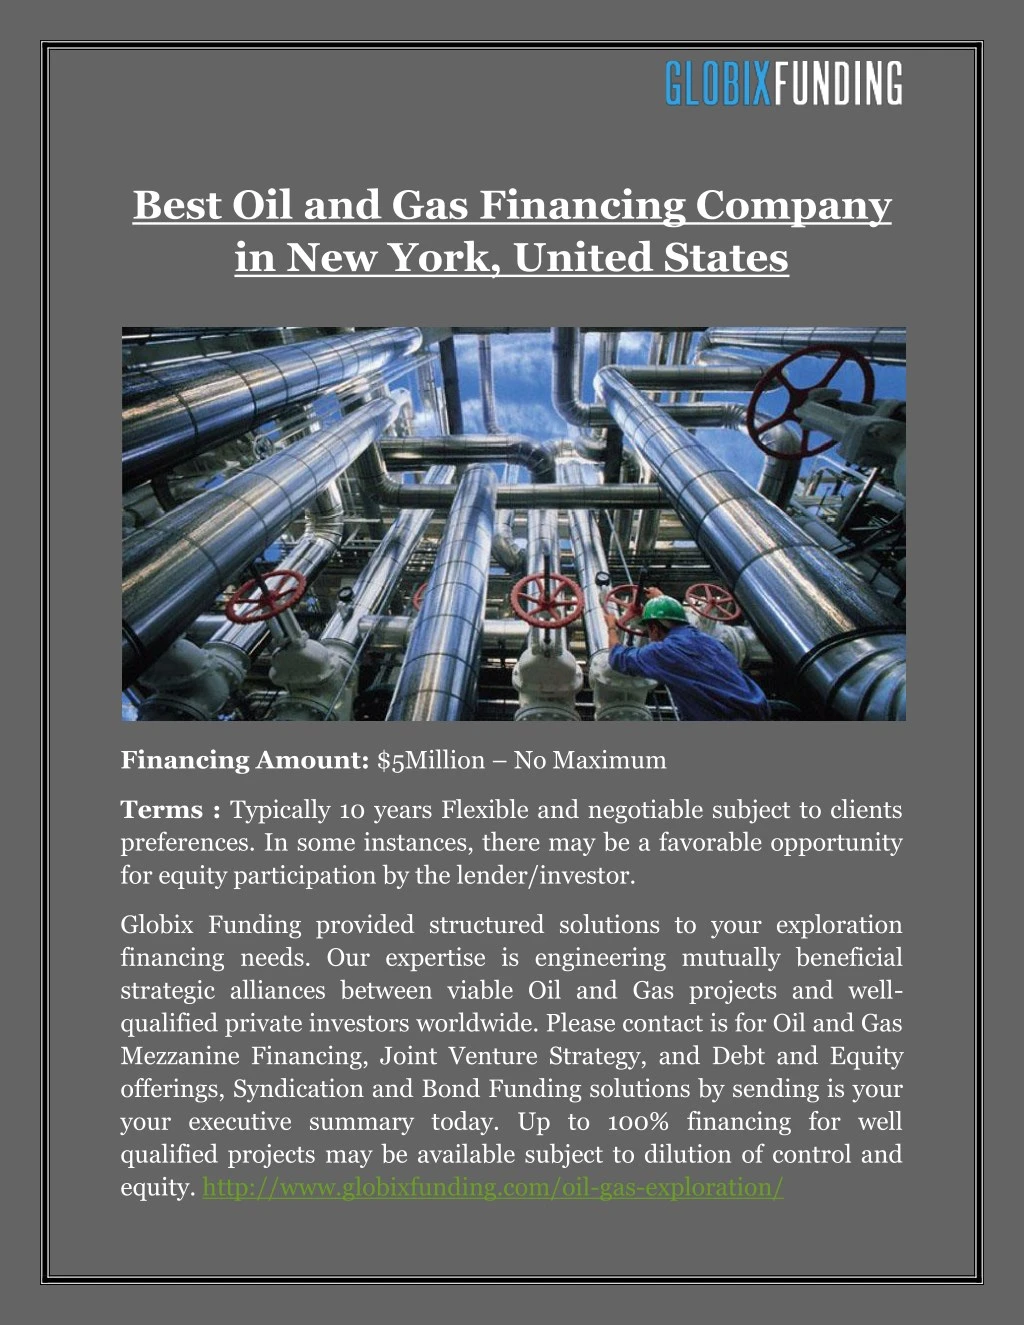 best oil and gas financing company in new york